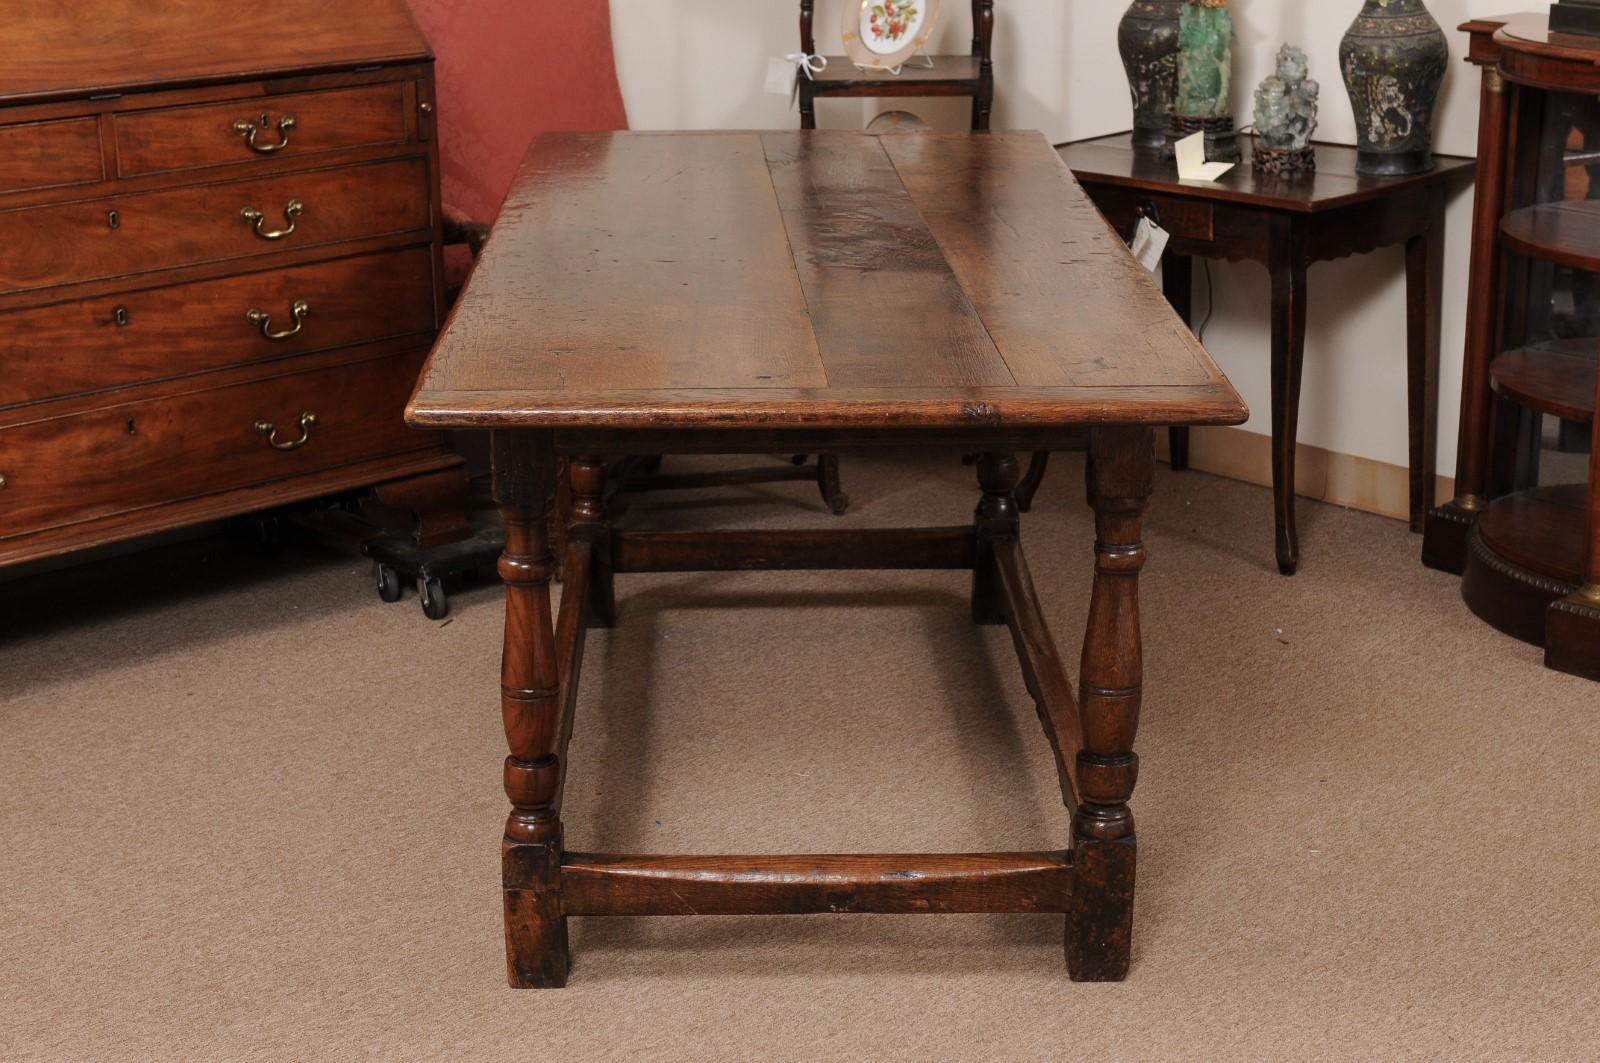  Early 18th Century English Long Oak Hall Table with Carved Frieze, Turned Legs  For Sale 8